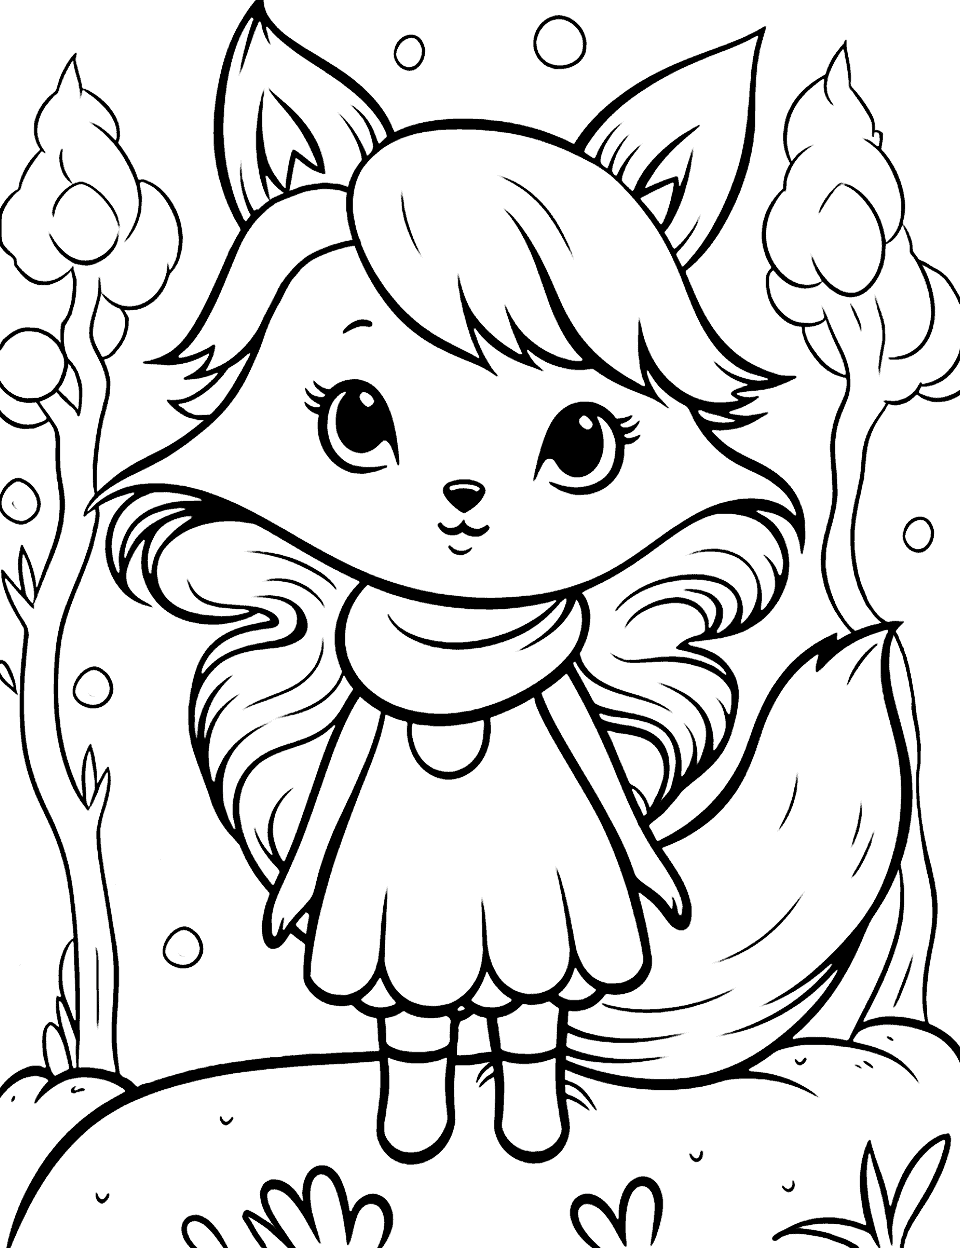 Fox Girl Adventure Coloring Page - A fox-girl hybrid embarking on a mystical journey through a whimsical forest.